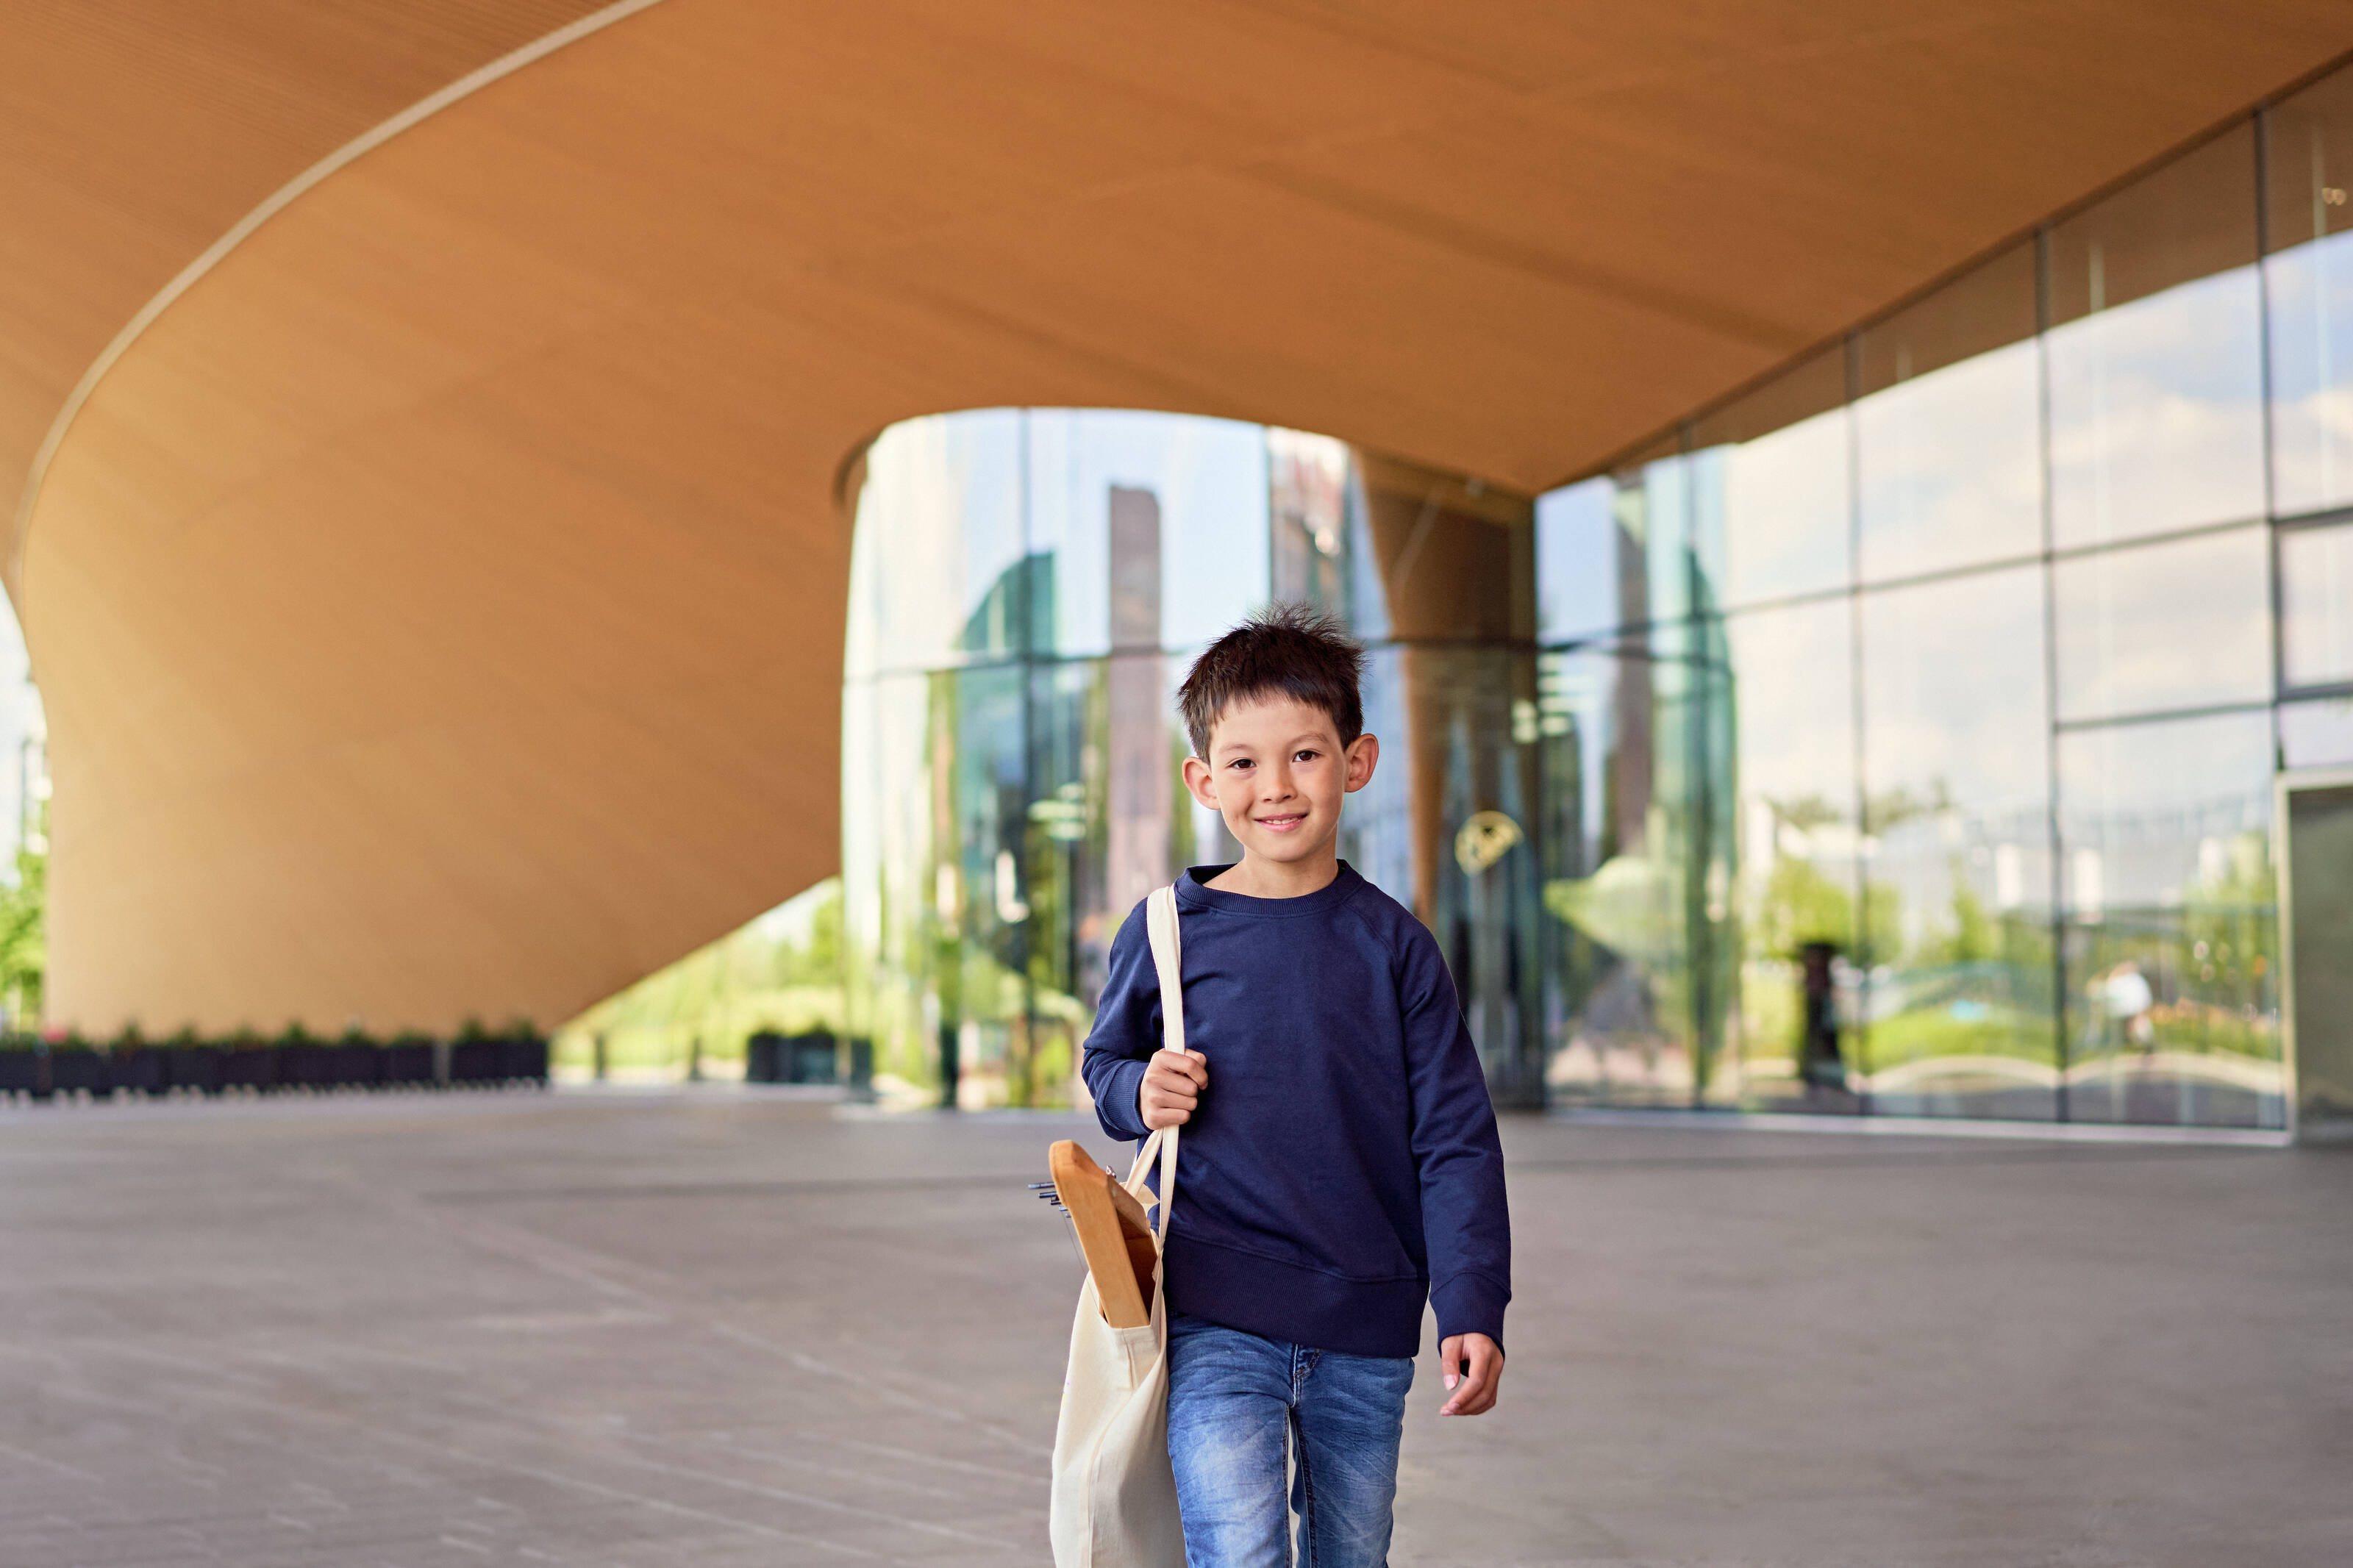 A young boy carrying a kantele walking out of the Oodi library in Helsinki